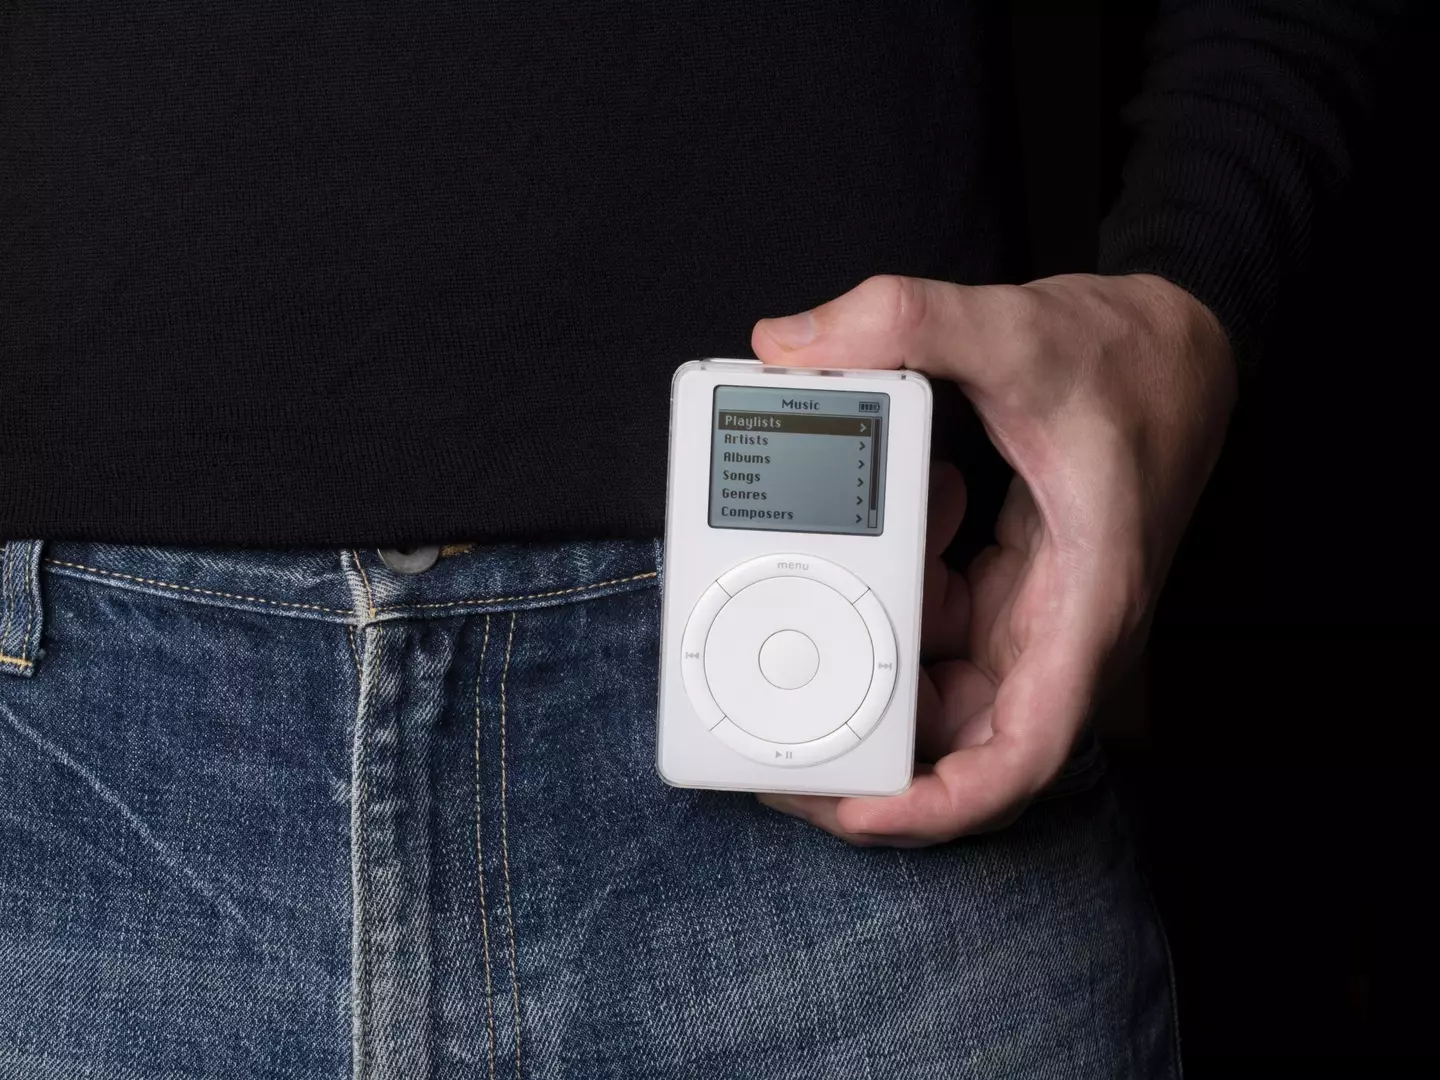 The first generation iPod.